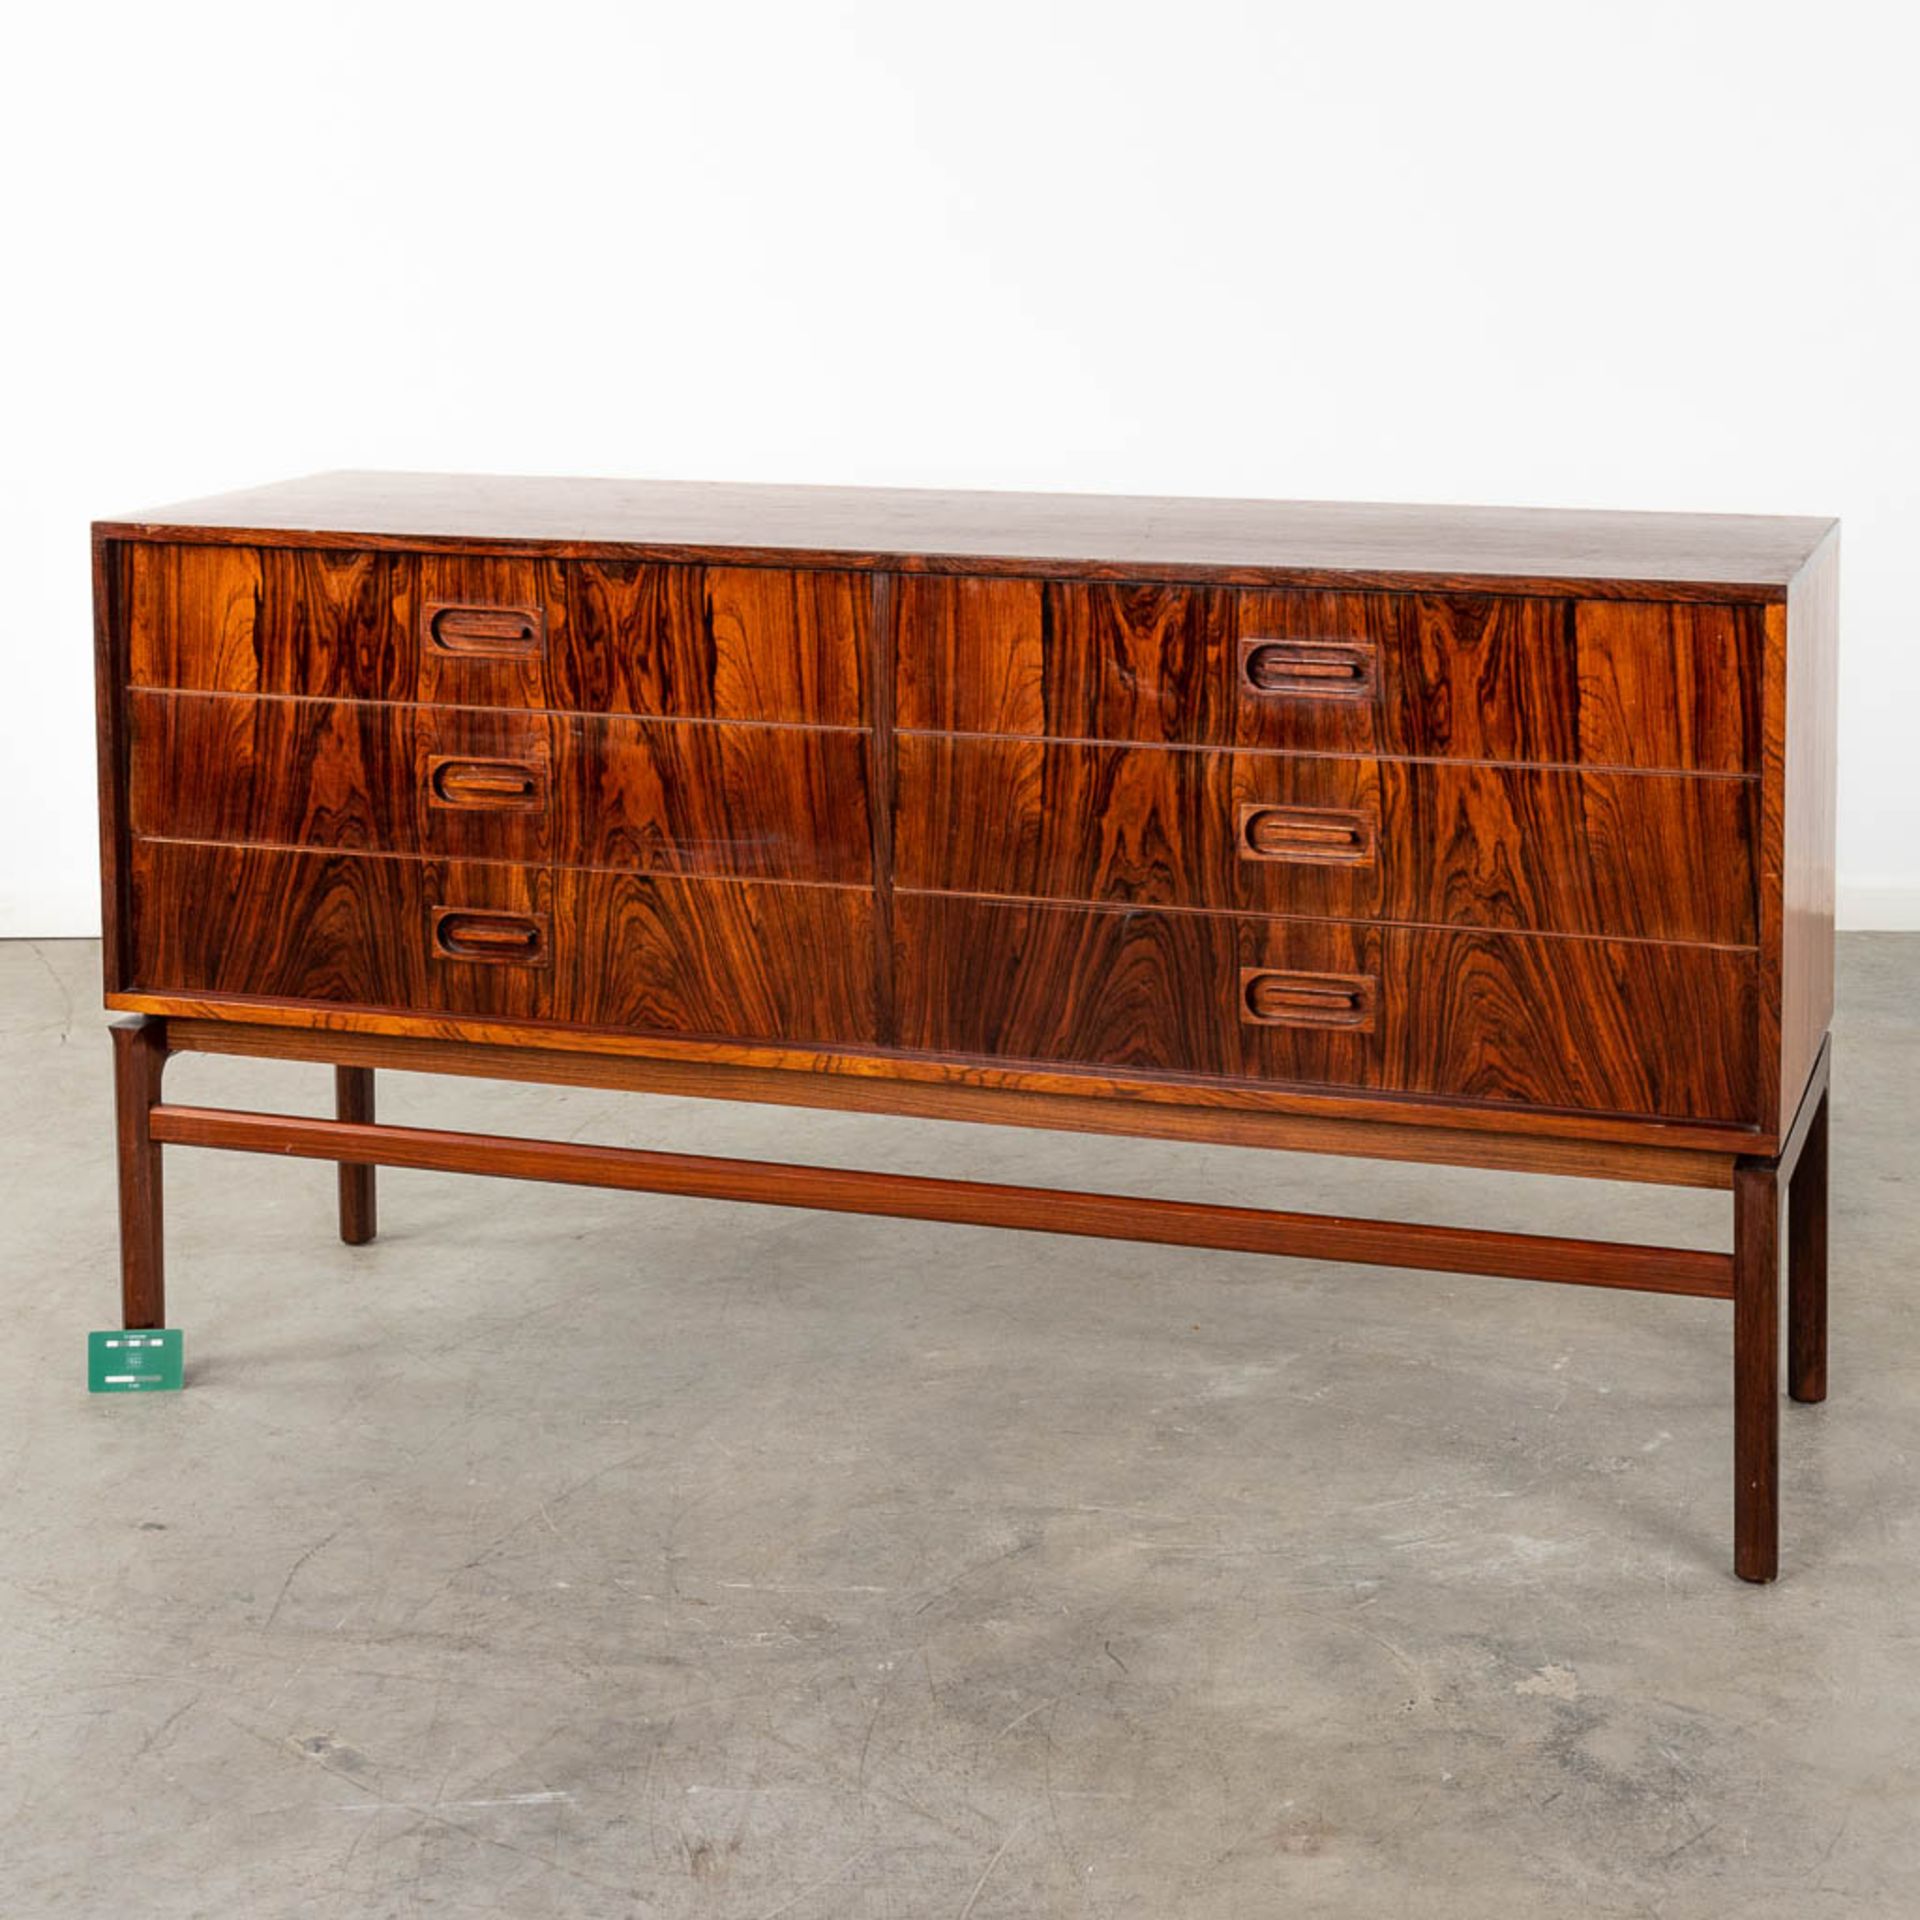 A mid-century Scandinavian Sideboard with 6 drawers, and rosewood veneer. (D:45 x W:150 x H:80 cm) - Image 2 of 12